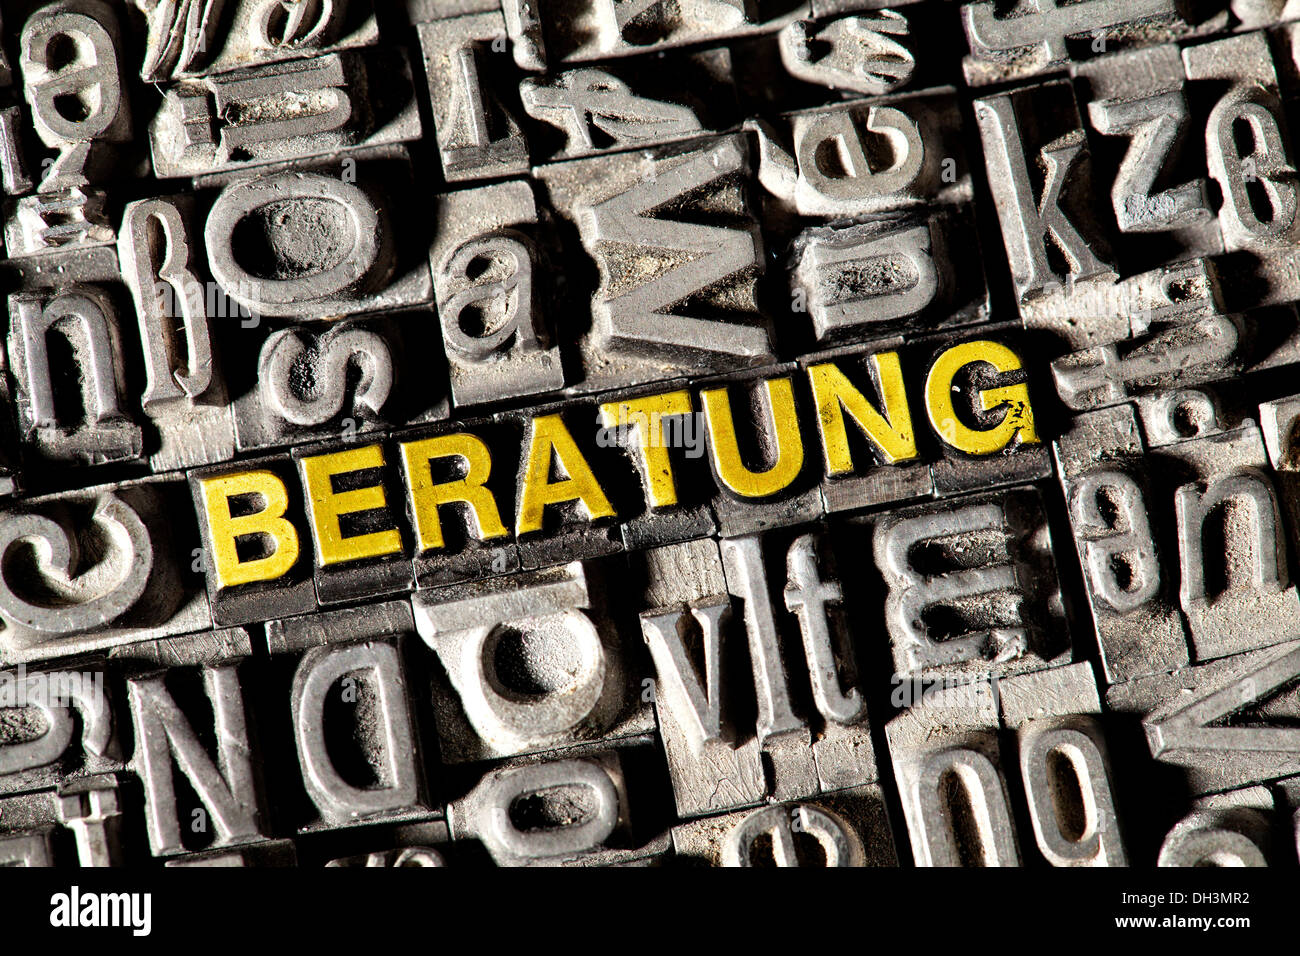 Old lead letters forming the word 'BERATUNG', German for 'ADVICE' Stock Photo